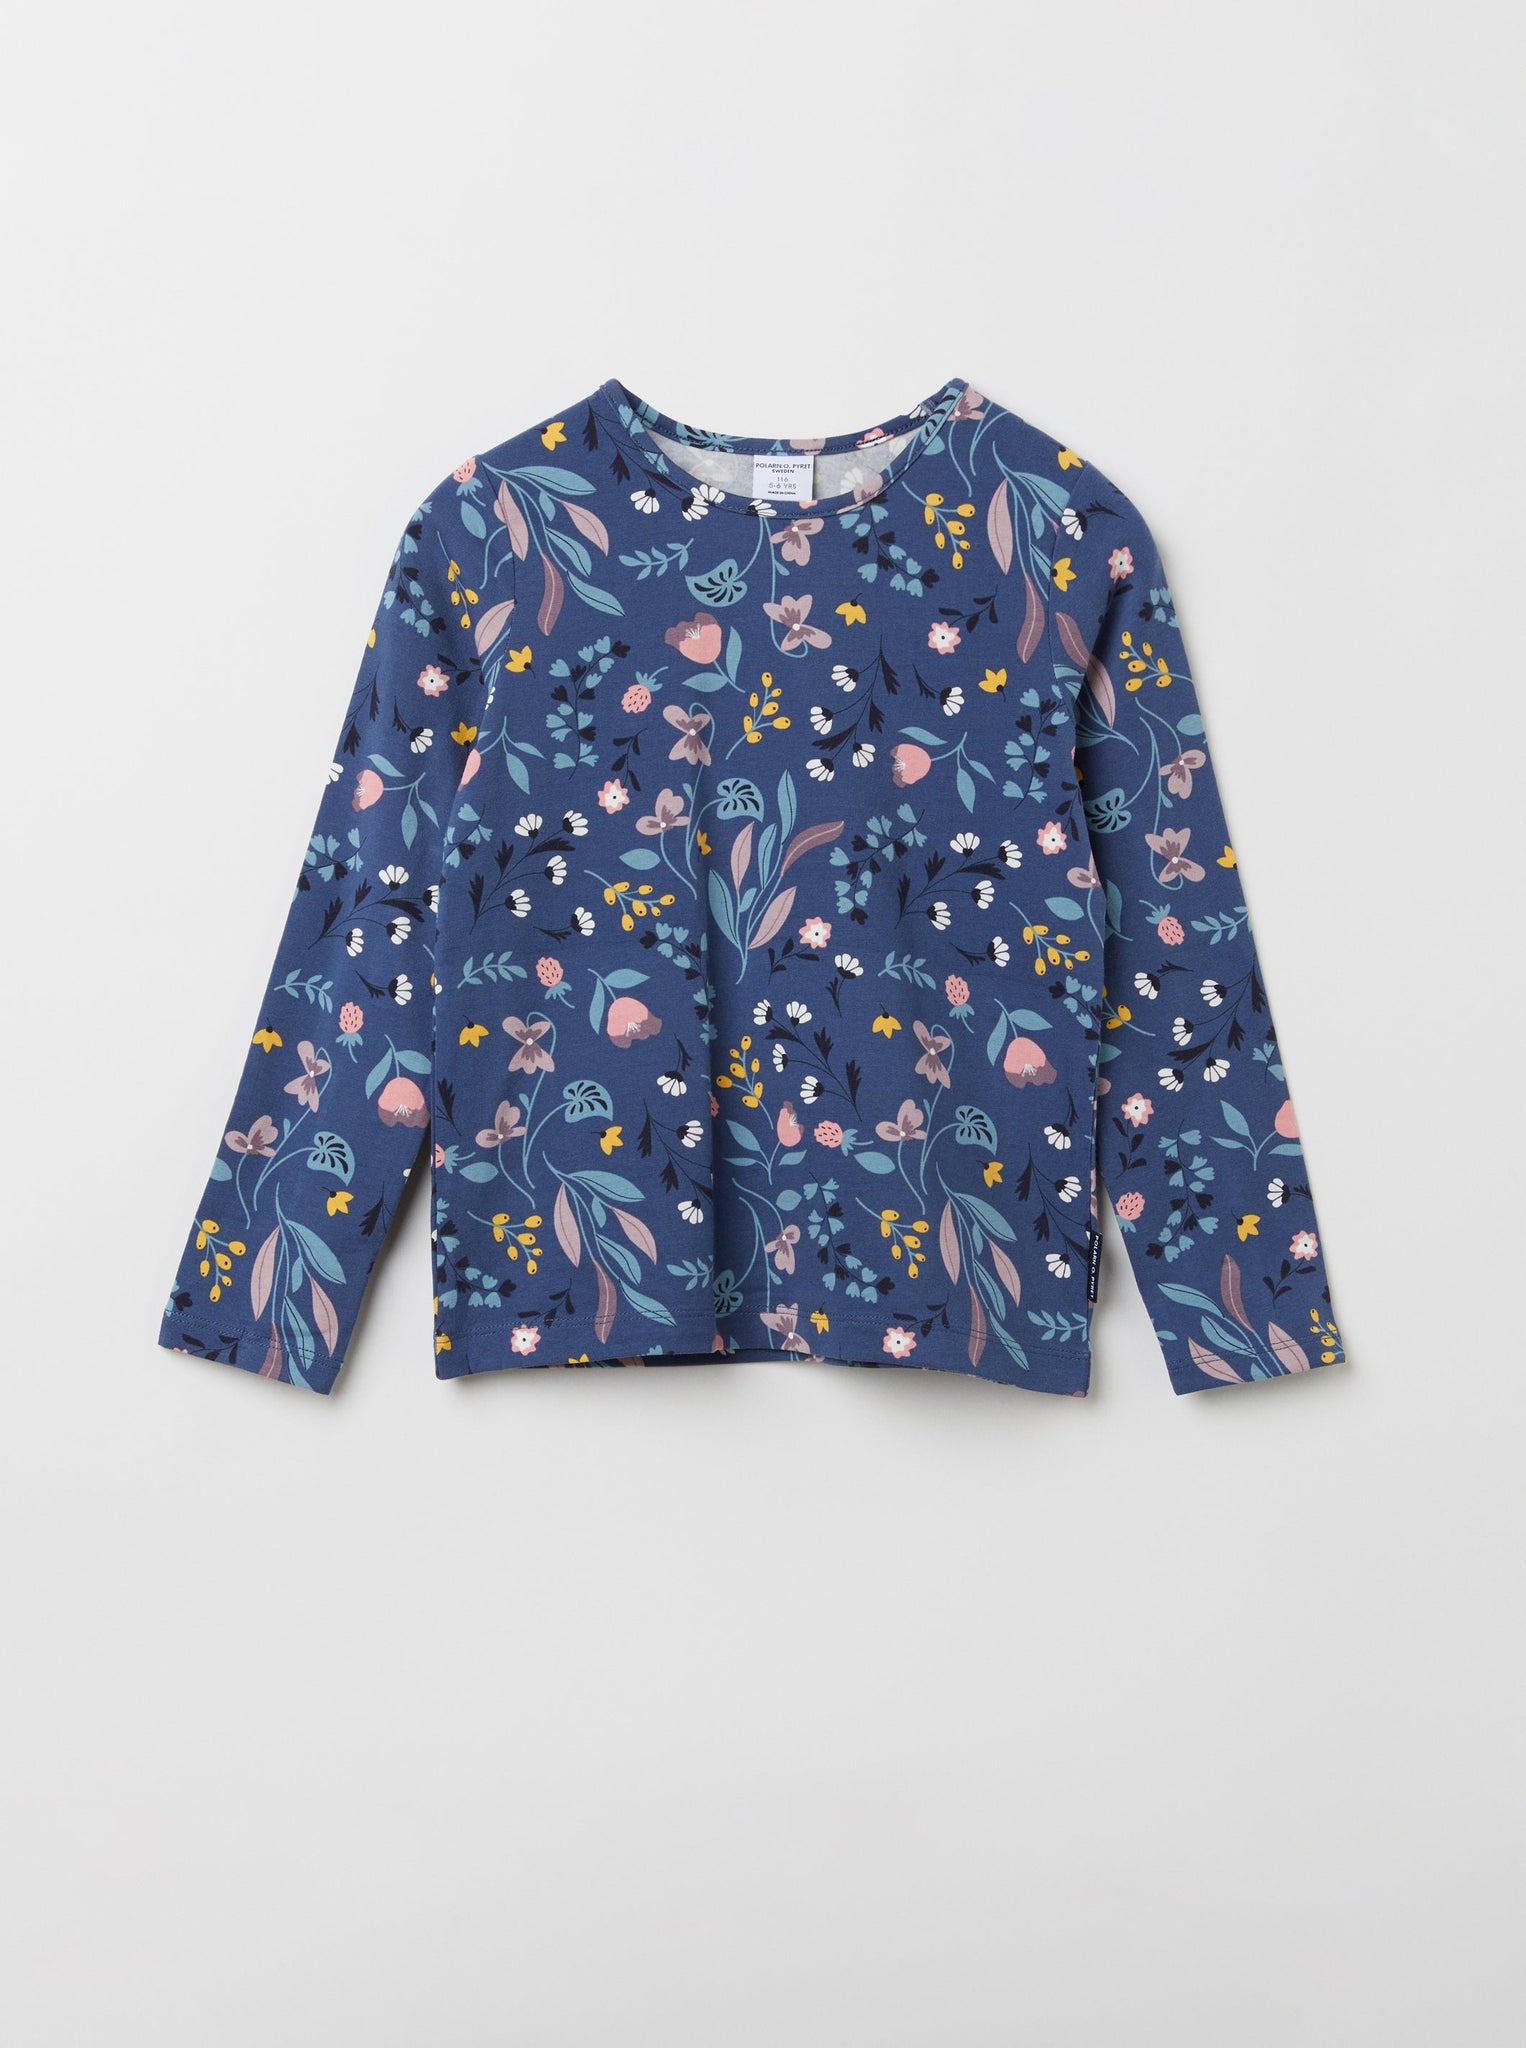 Organic Cotton Blue Floral Girls Top from the Polarn O. Pyret kidswear collection. Clothes made using sustainably sourced materials.